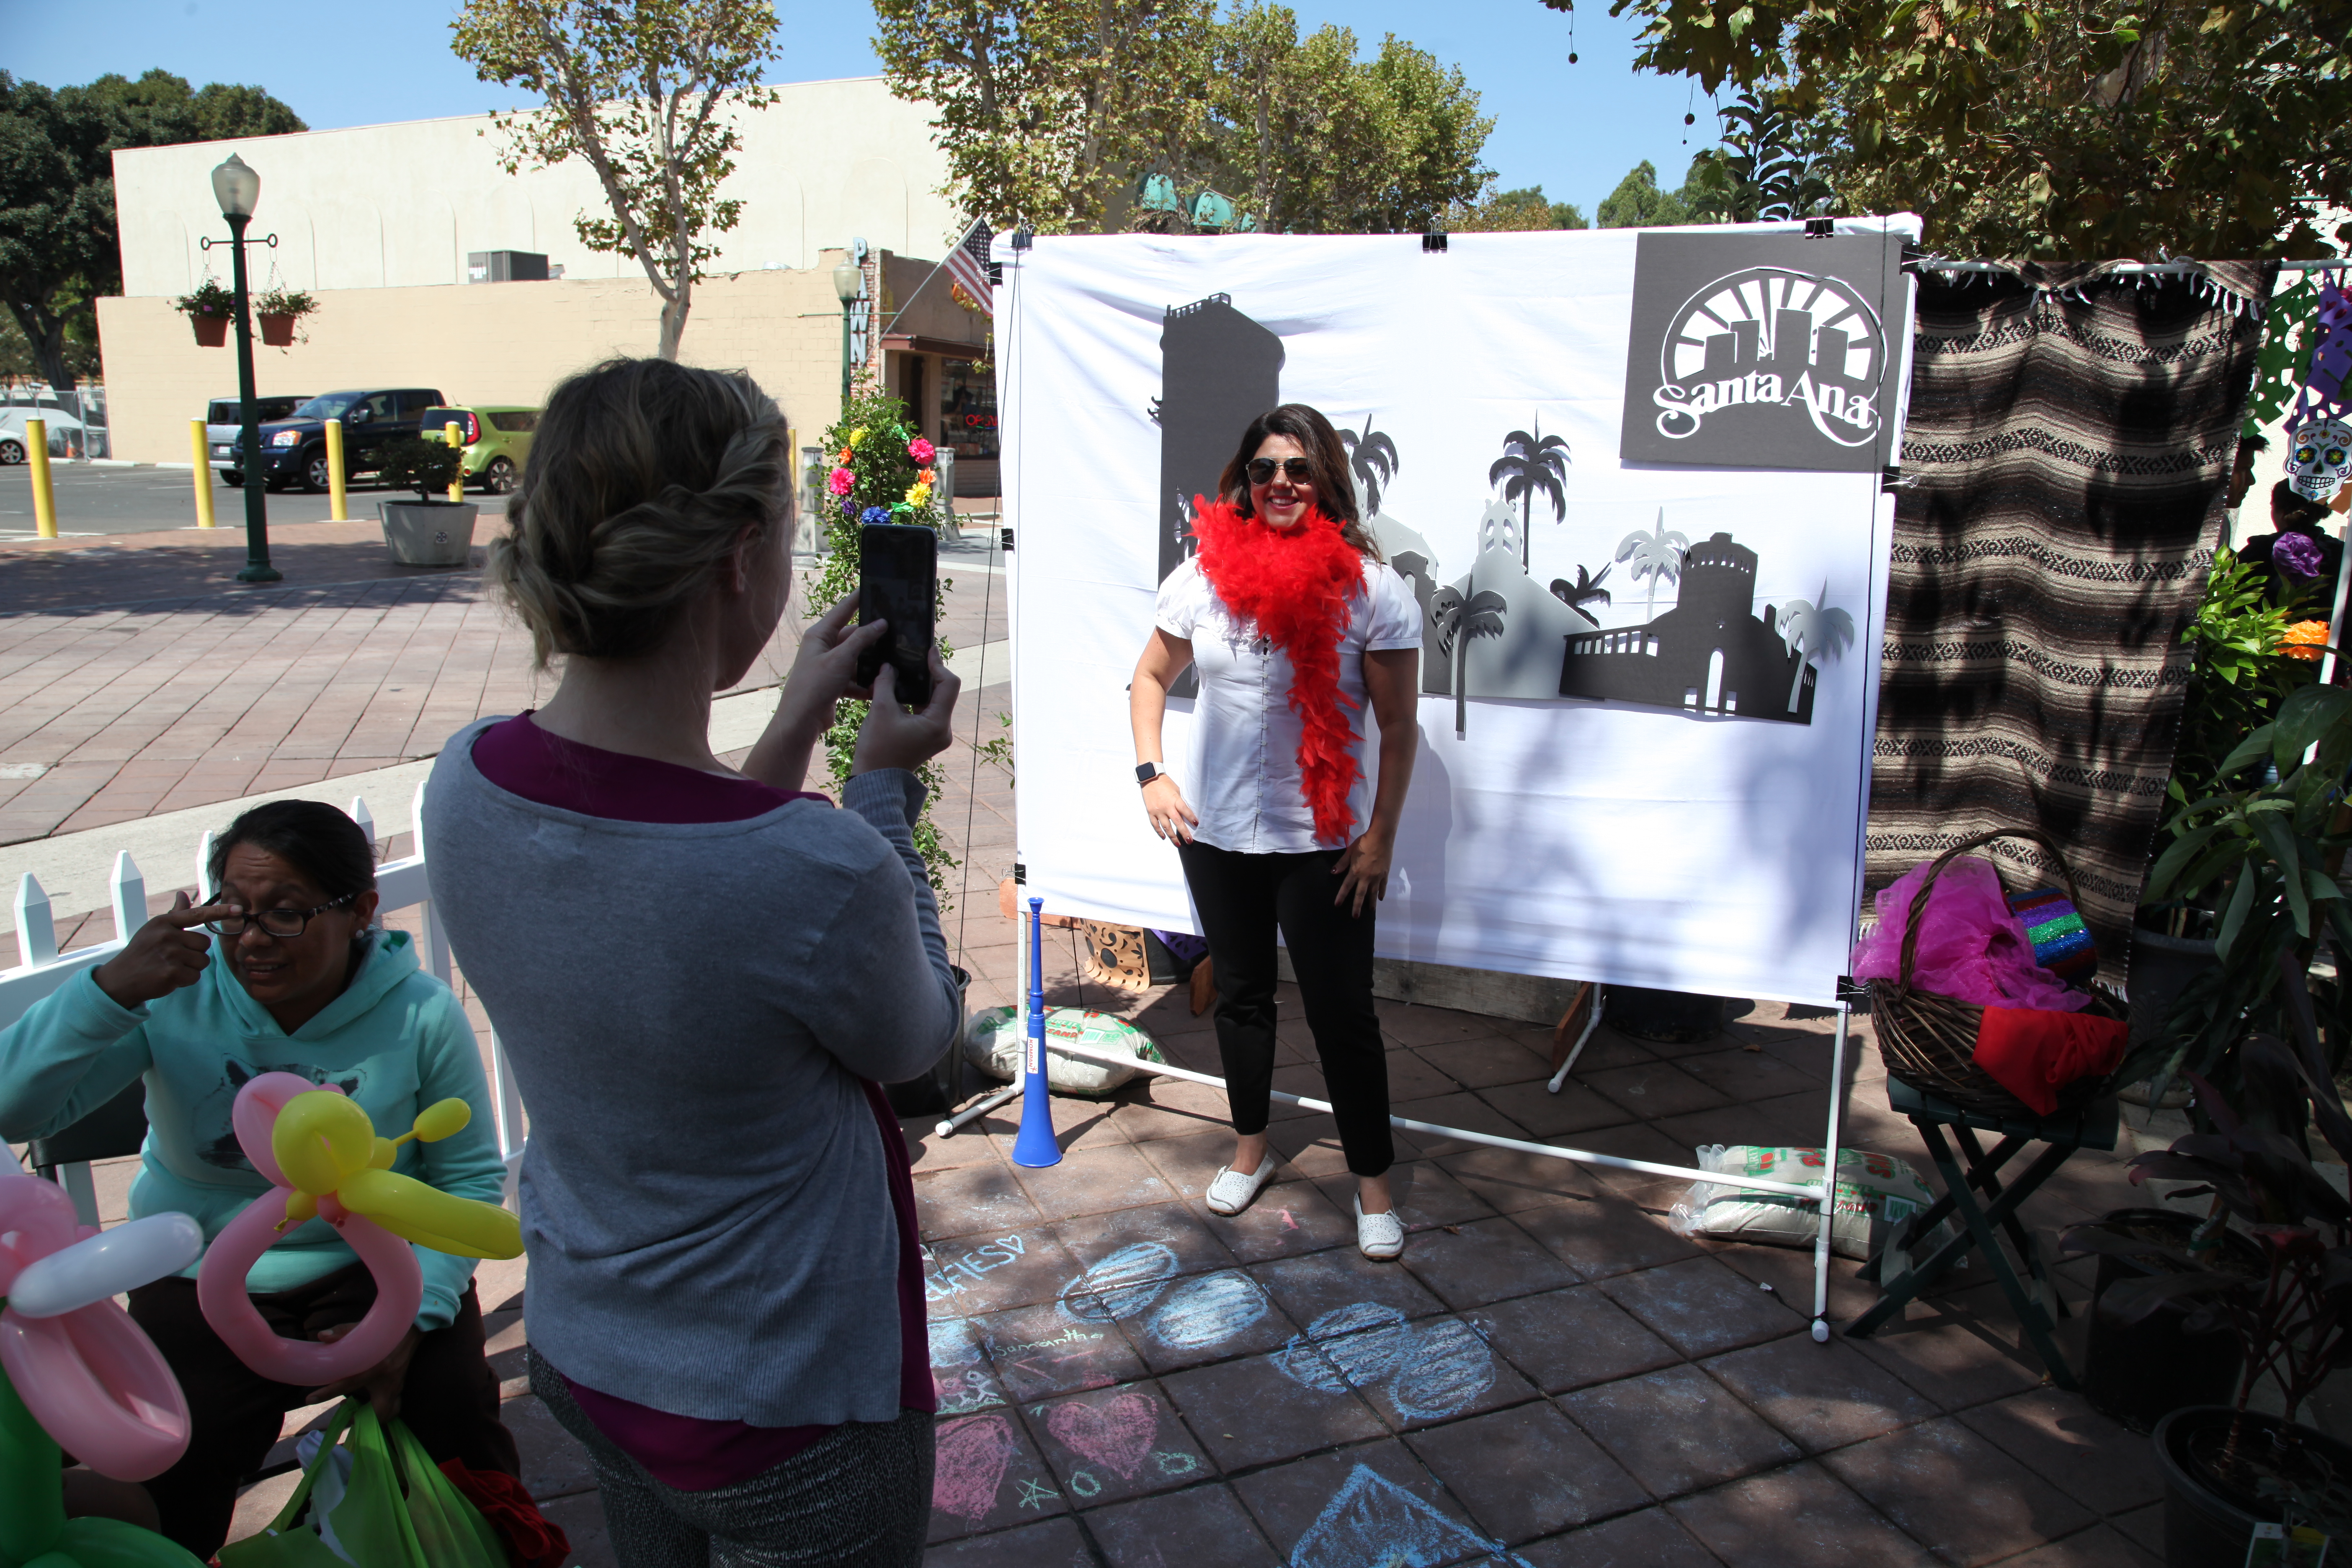 Michele Martinez, right, posing at the Santa Ana photo booth during Saturday's (Park)ing Day event. Photo by Kristopher Fortin